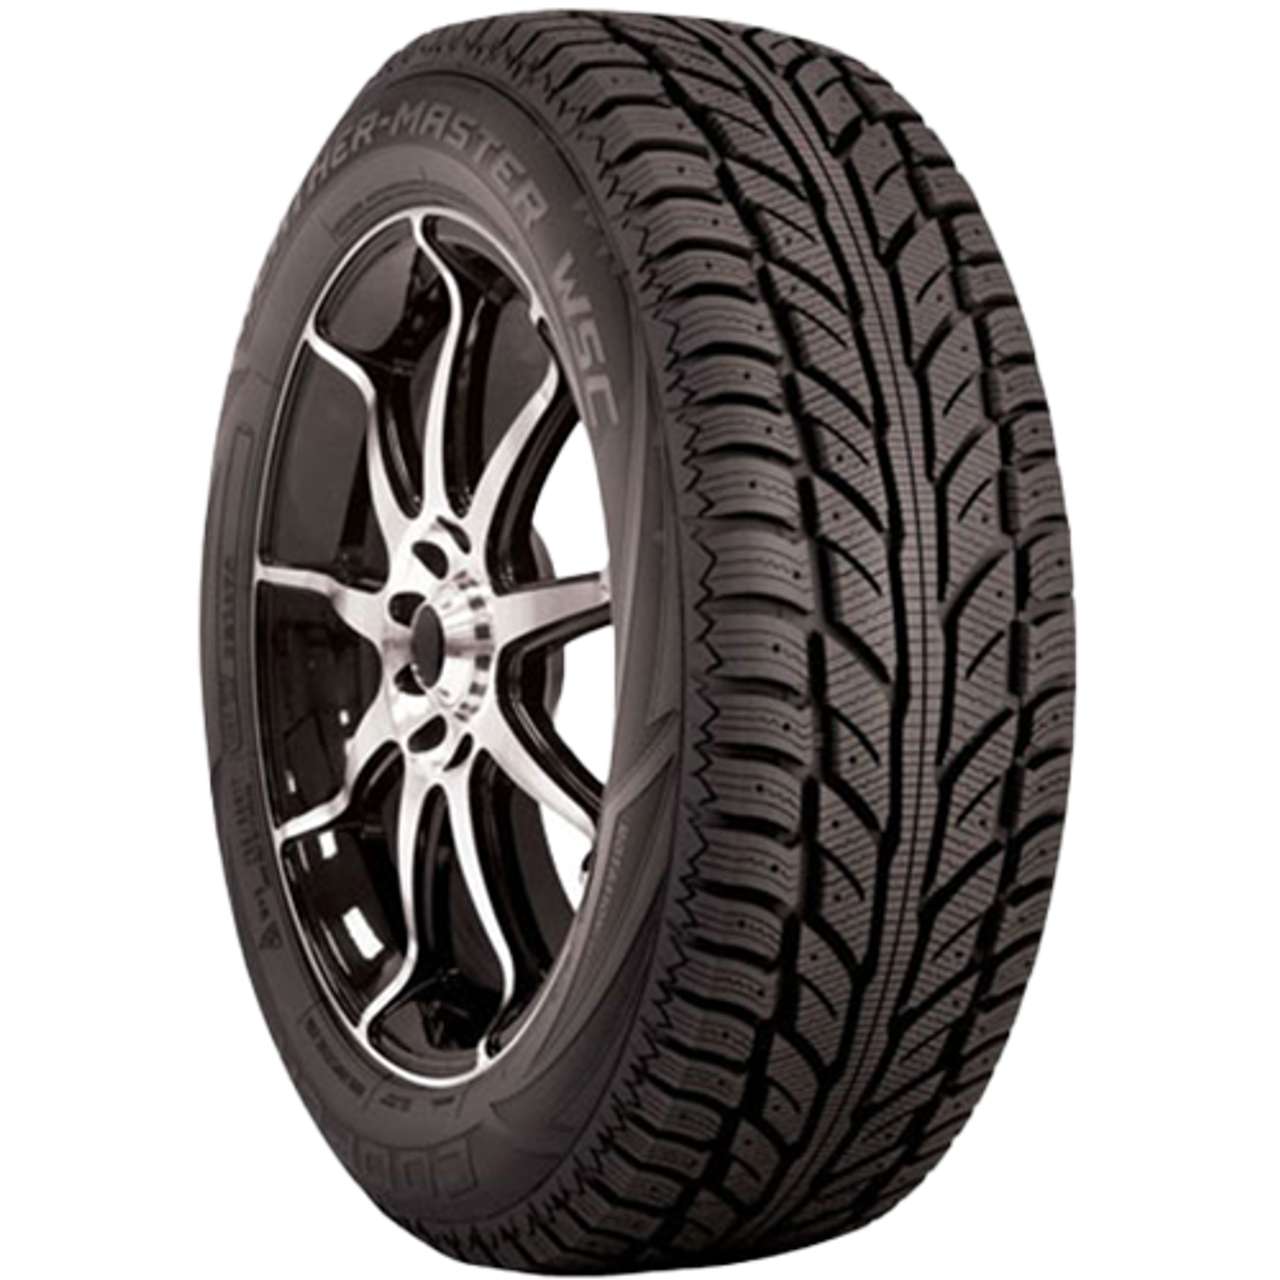 COOPER WEATHERMASTER WSC 215/65R16 98T STUDDABLE BSW